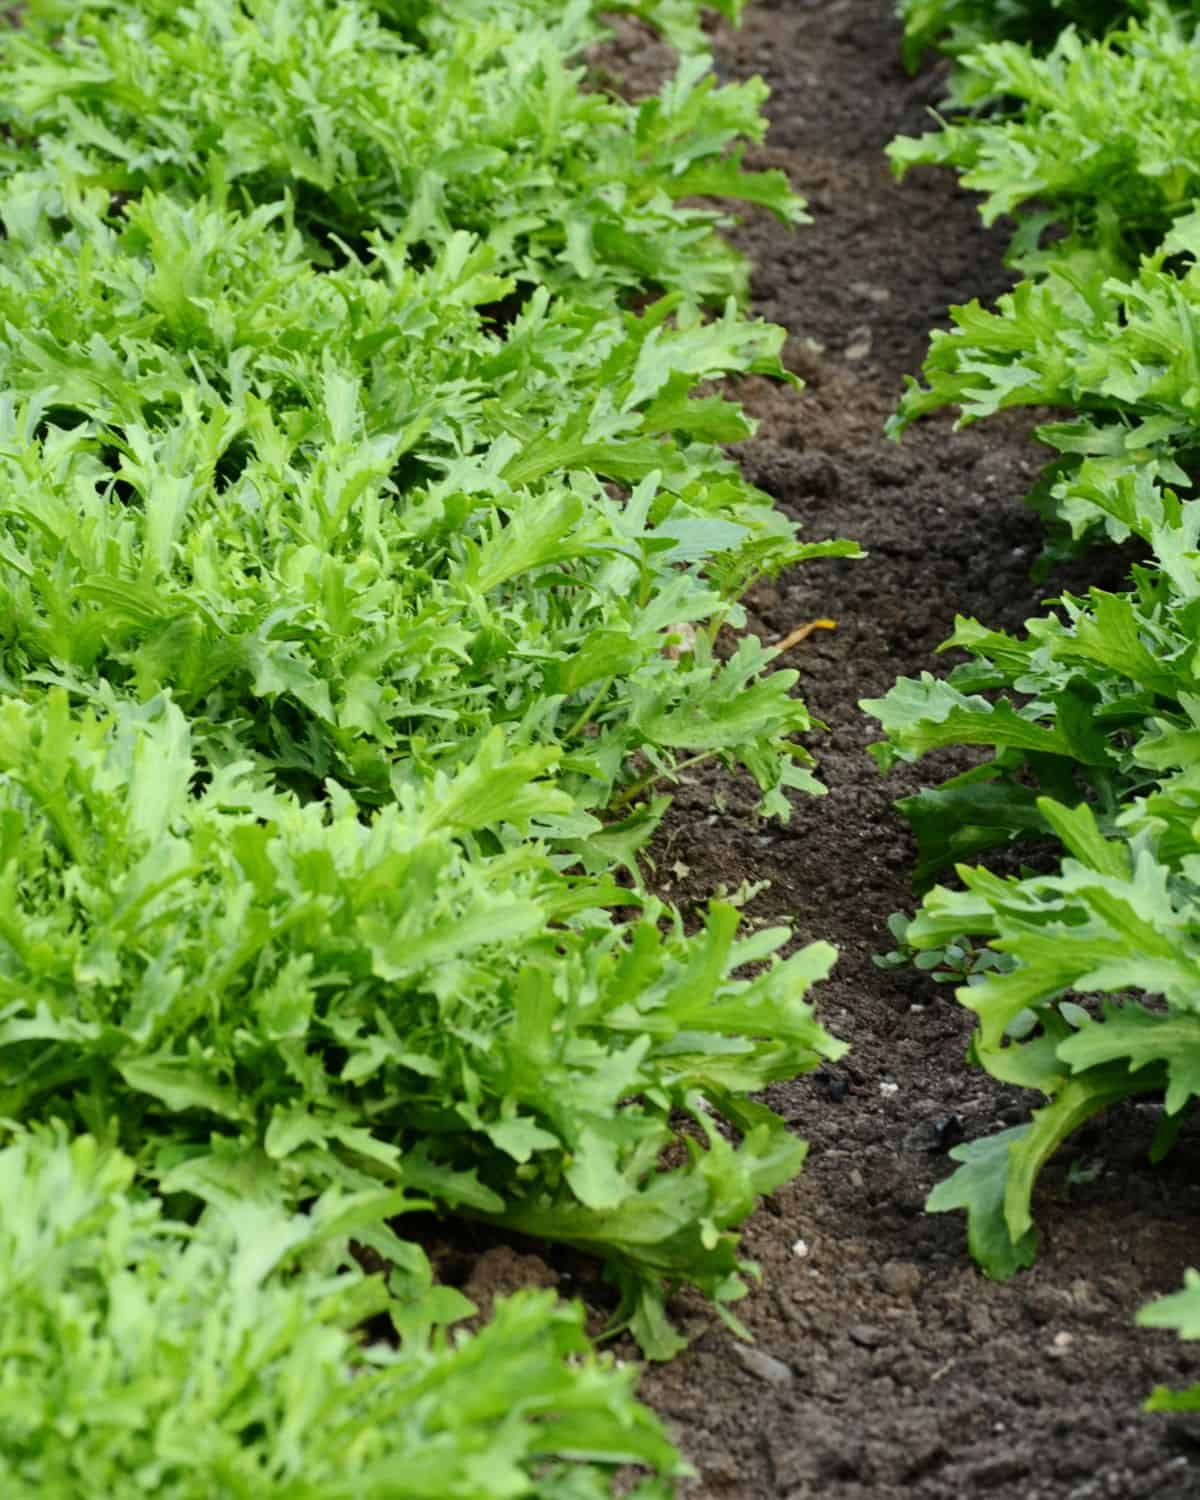 Planted rows of curly endive that would be an excellent substitute for arugula.